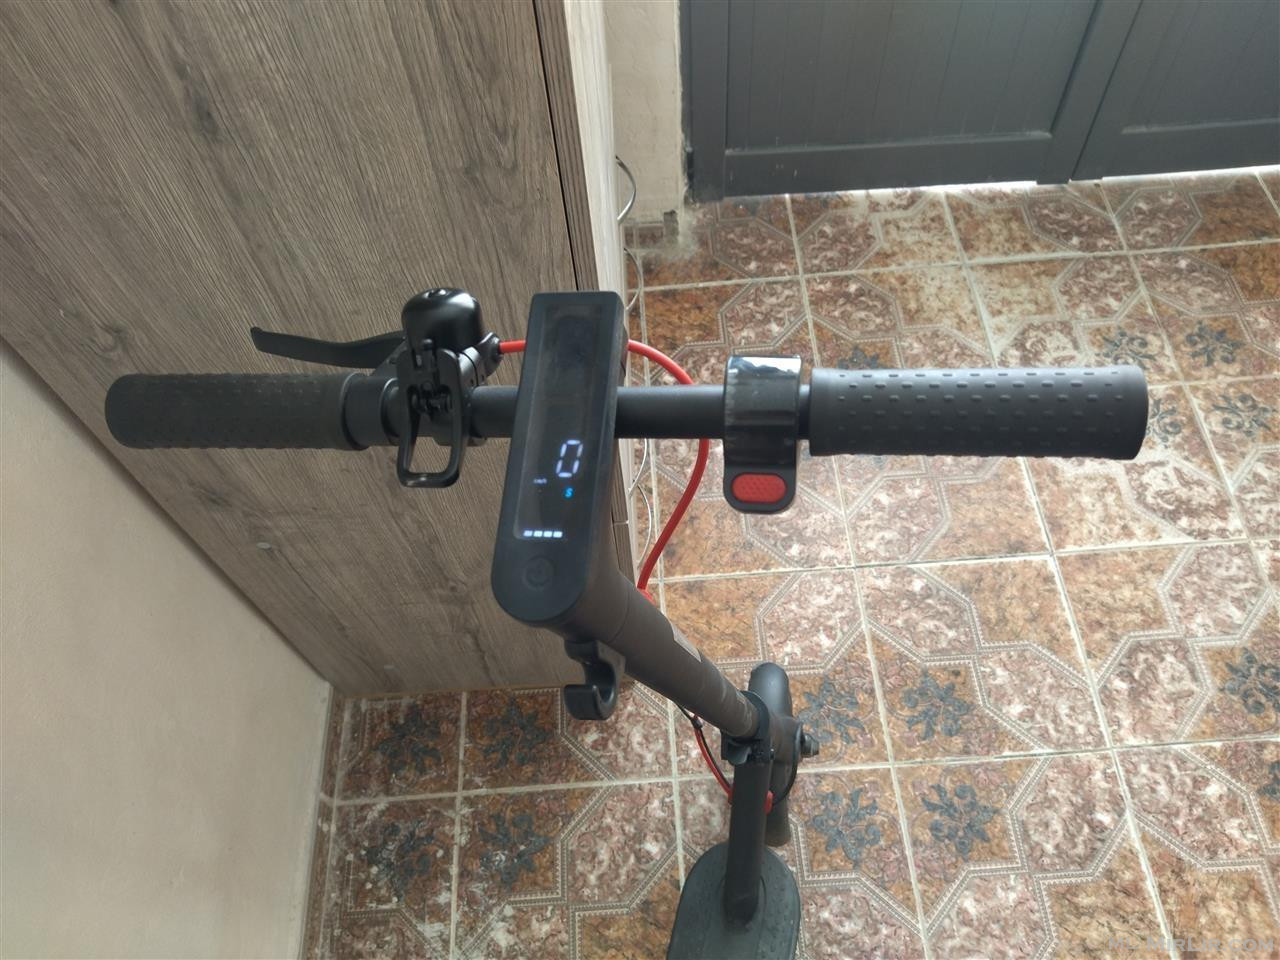  xiaomi electric scooter proo 